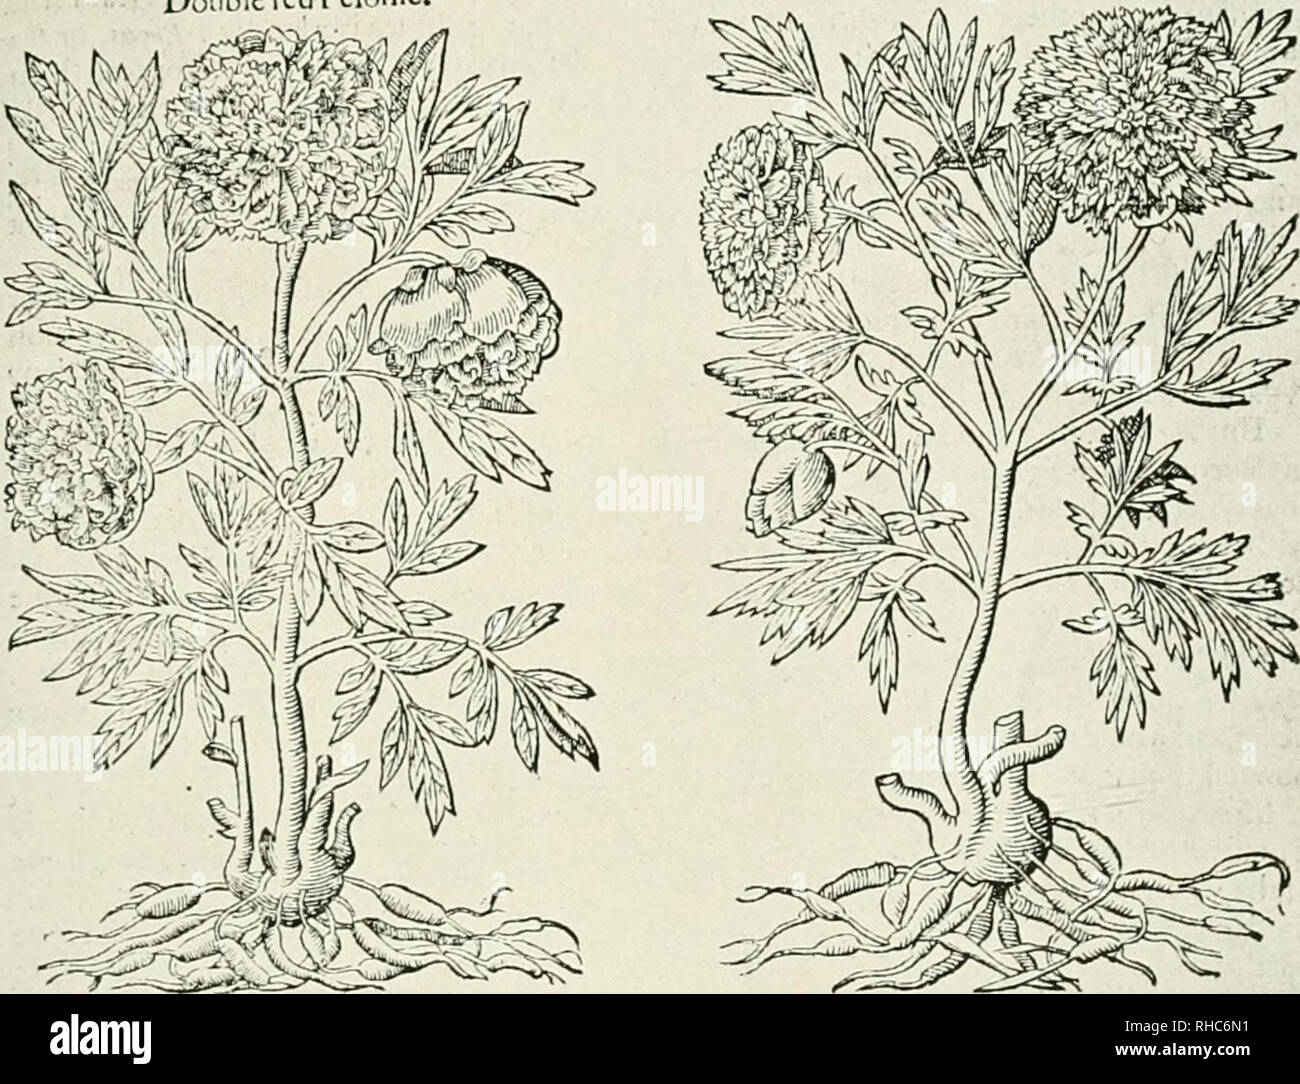 . The book of the peony. HISTORIE OF PLANTS. 831 4 Thercisfoundanorherrortofthedo.bIcPcionicnotd,fFcringfron,thcp^^^^^^ lcaucs,orrootcs: this plant bringethroorthwh.ceQowcrswheremconri(tetluhed.ftcrencc. 3 Tteon'm fcrmina mult if Ux Double red Ptioiiie. 4 raoniaf(rmhiii polyanthusflorCMlba, Tliedouble white Pcionife.. L, ^Thcdtfcriptlon. There is another kinde of Peionie (called o DoIokh-m Pnonin famina altera, but of Pena Ttontt Promijcu.i fennetitra: m Enghfh Maiden or VirginePcionic ) that is like vnto the common tcmalc Peionic,(auing that iiis Icaiies and flowers are inuch Iraaller, and t Stock Photo